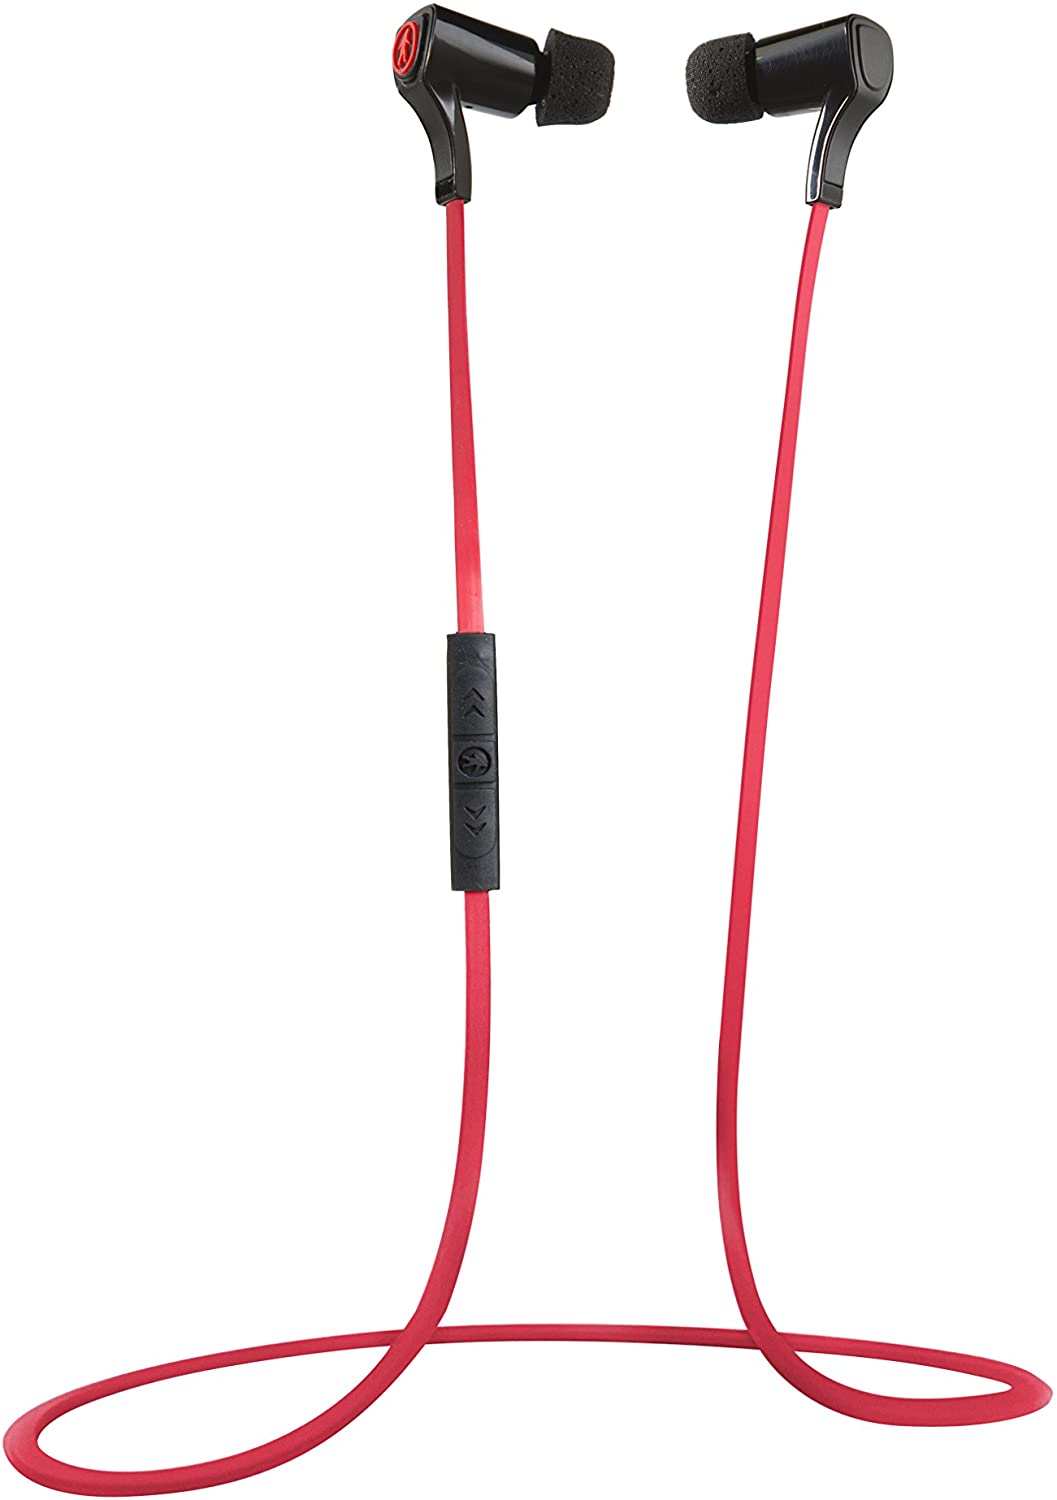 Outdoor Tech Orcas Sports Wireless Earbuds - Red